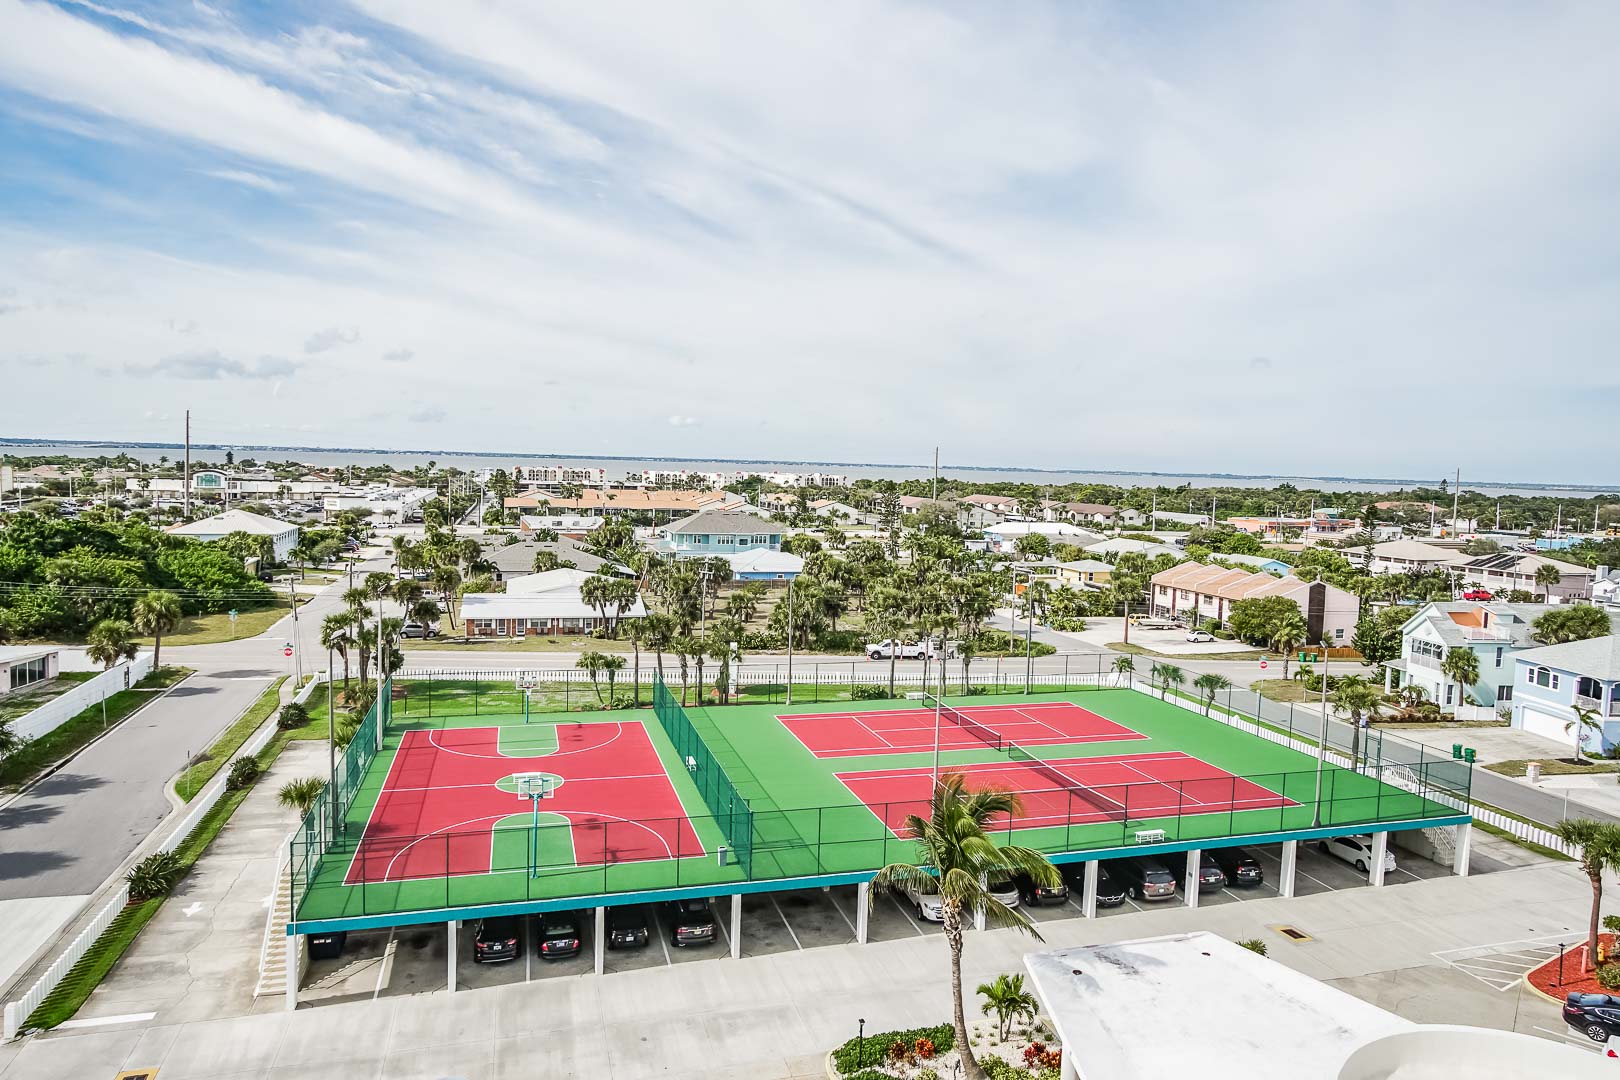 An expansive view of the tennis court and basketball court at VRI's Discovery Beach Resort in Cocoa Beach, Florida.